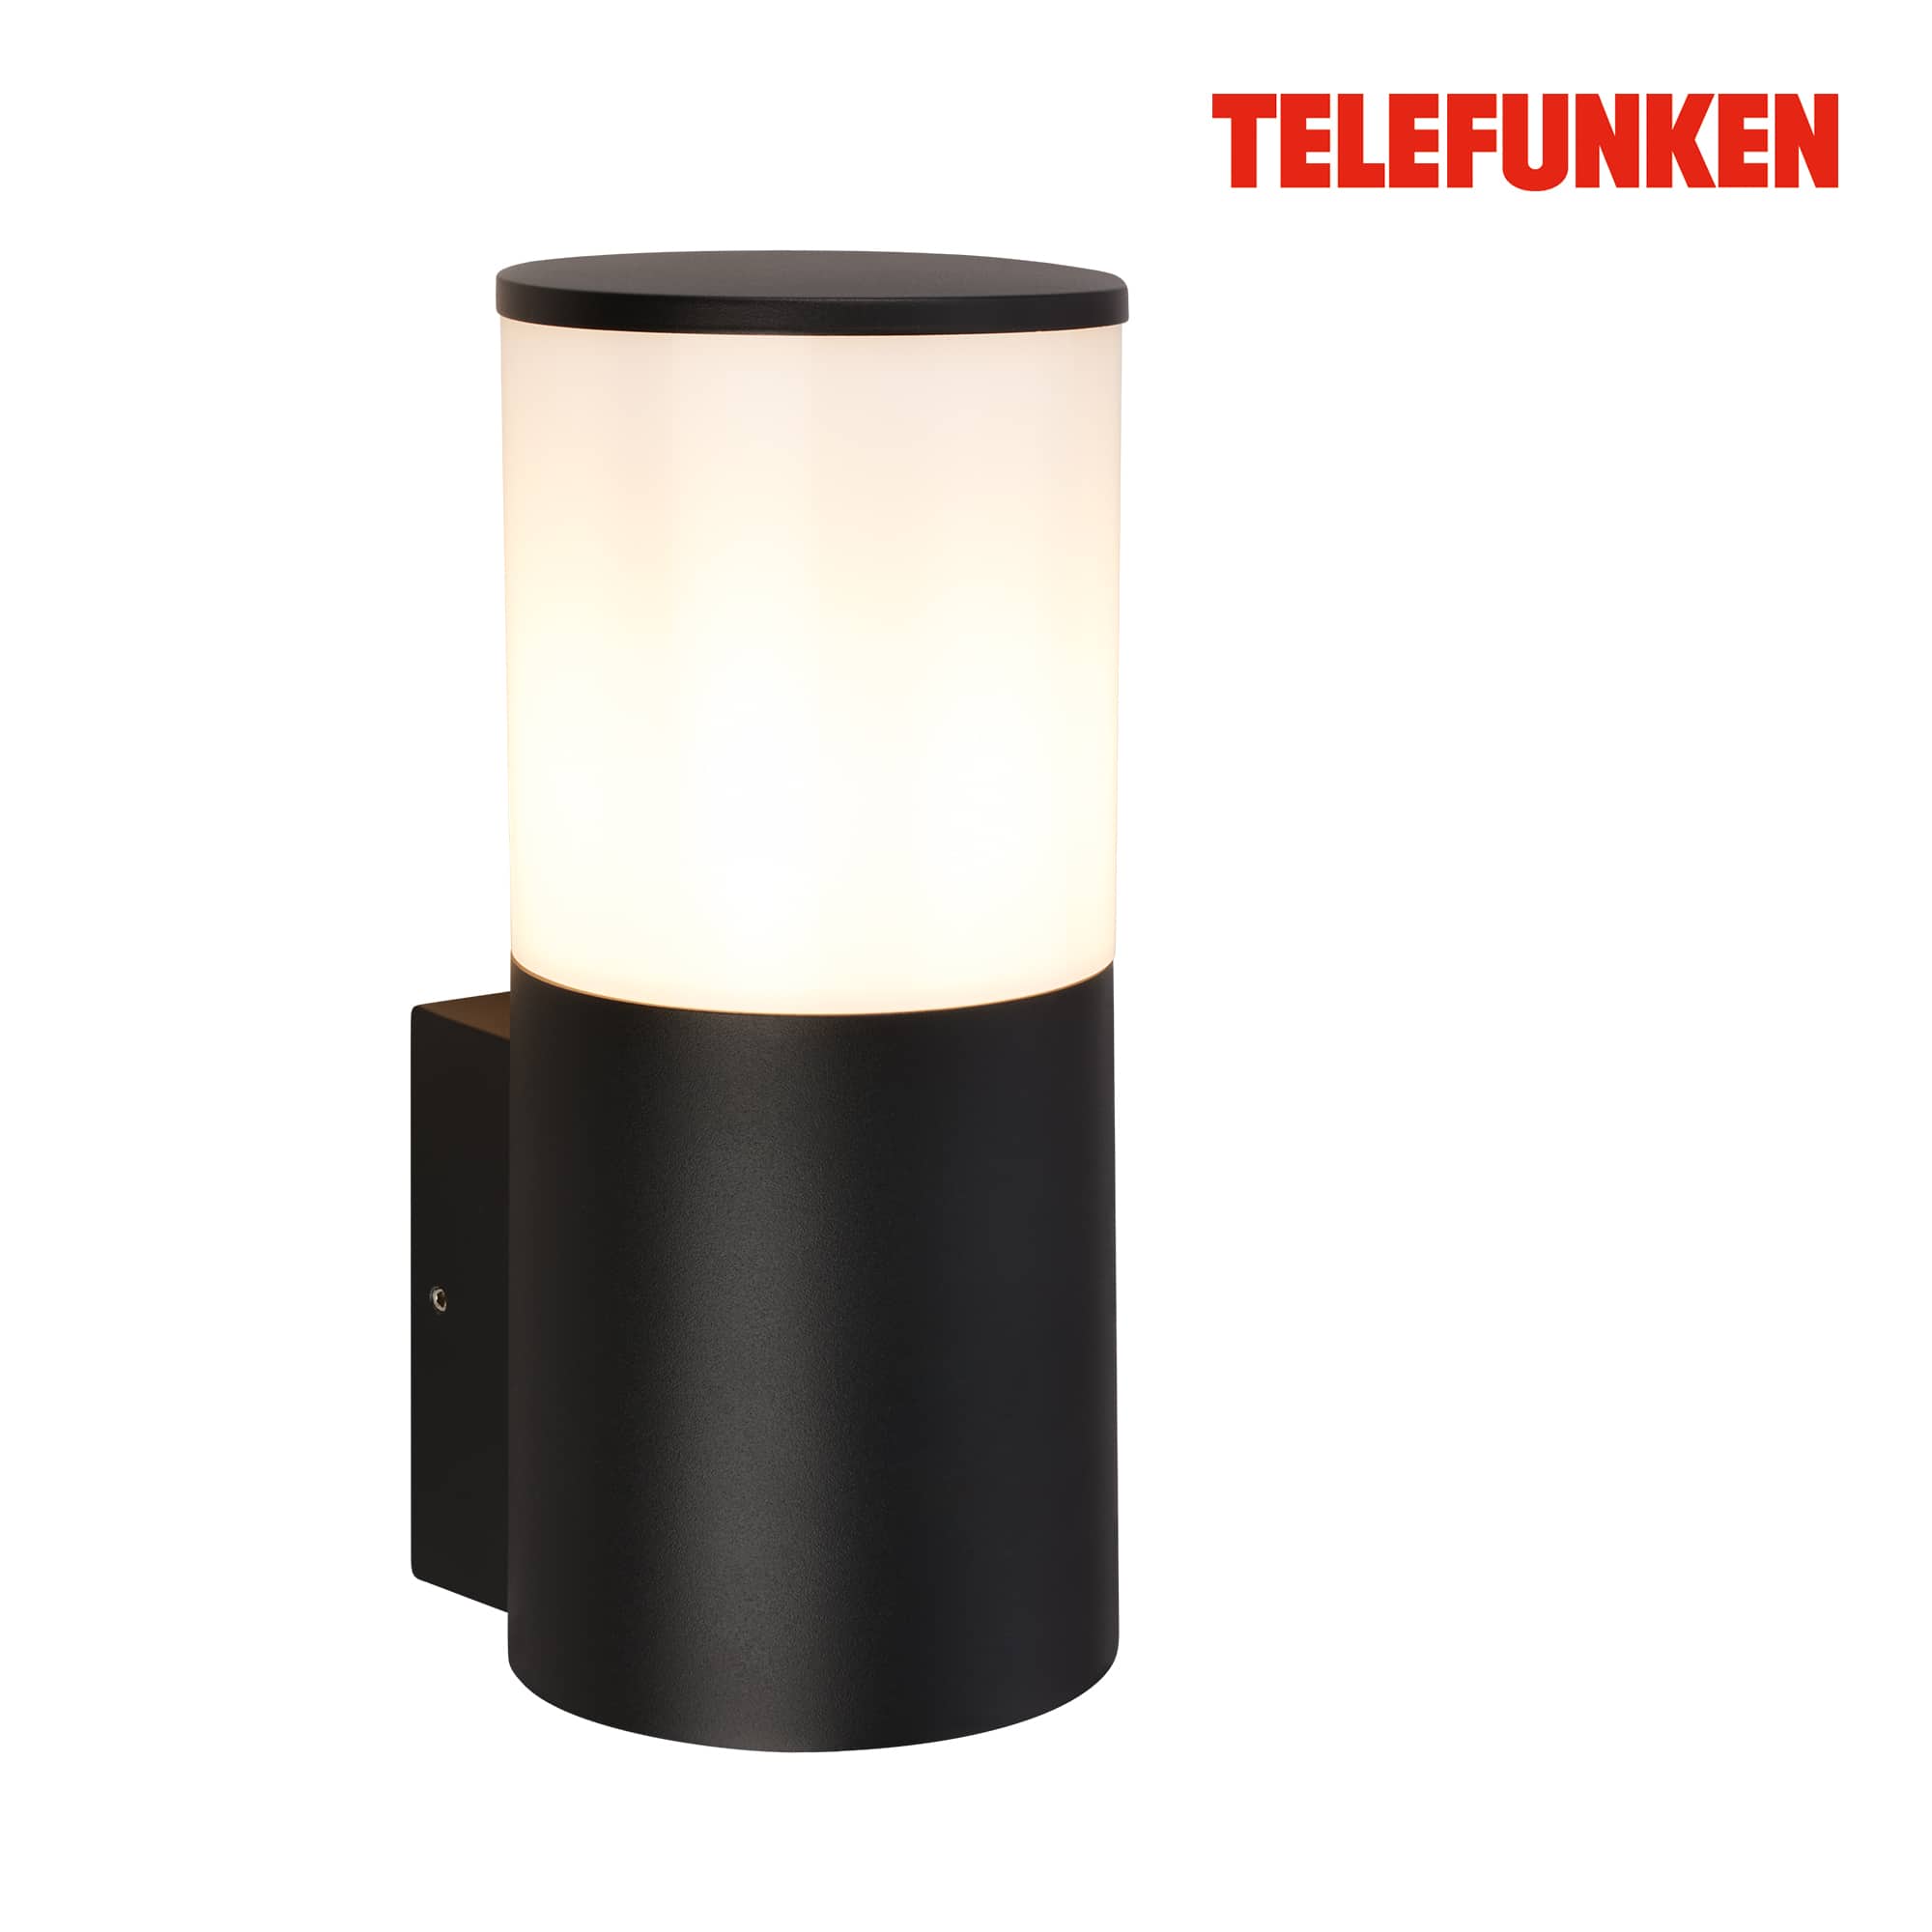 Telefunken LED wall lamp, splash water and dust protection, On/Off